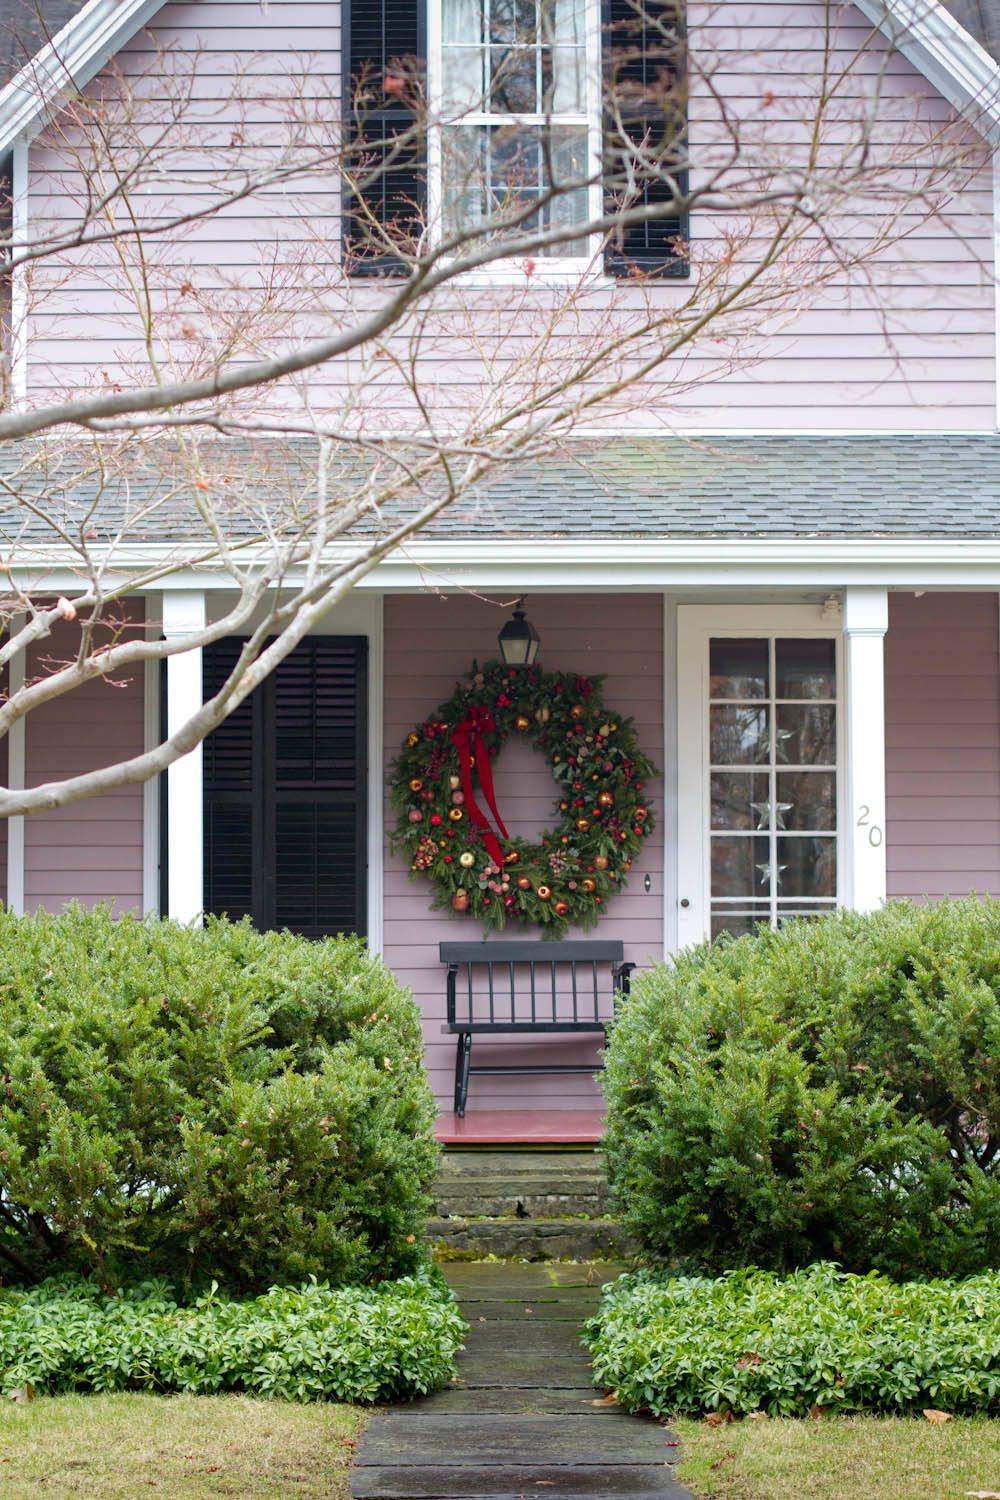 Large-wreath-brings-festive-cheer-to-the-front-porch-of-this-charming-New-York-home